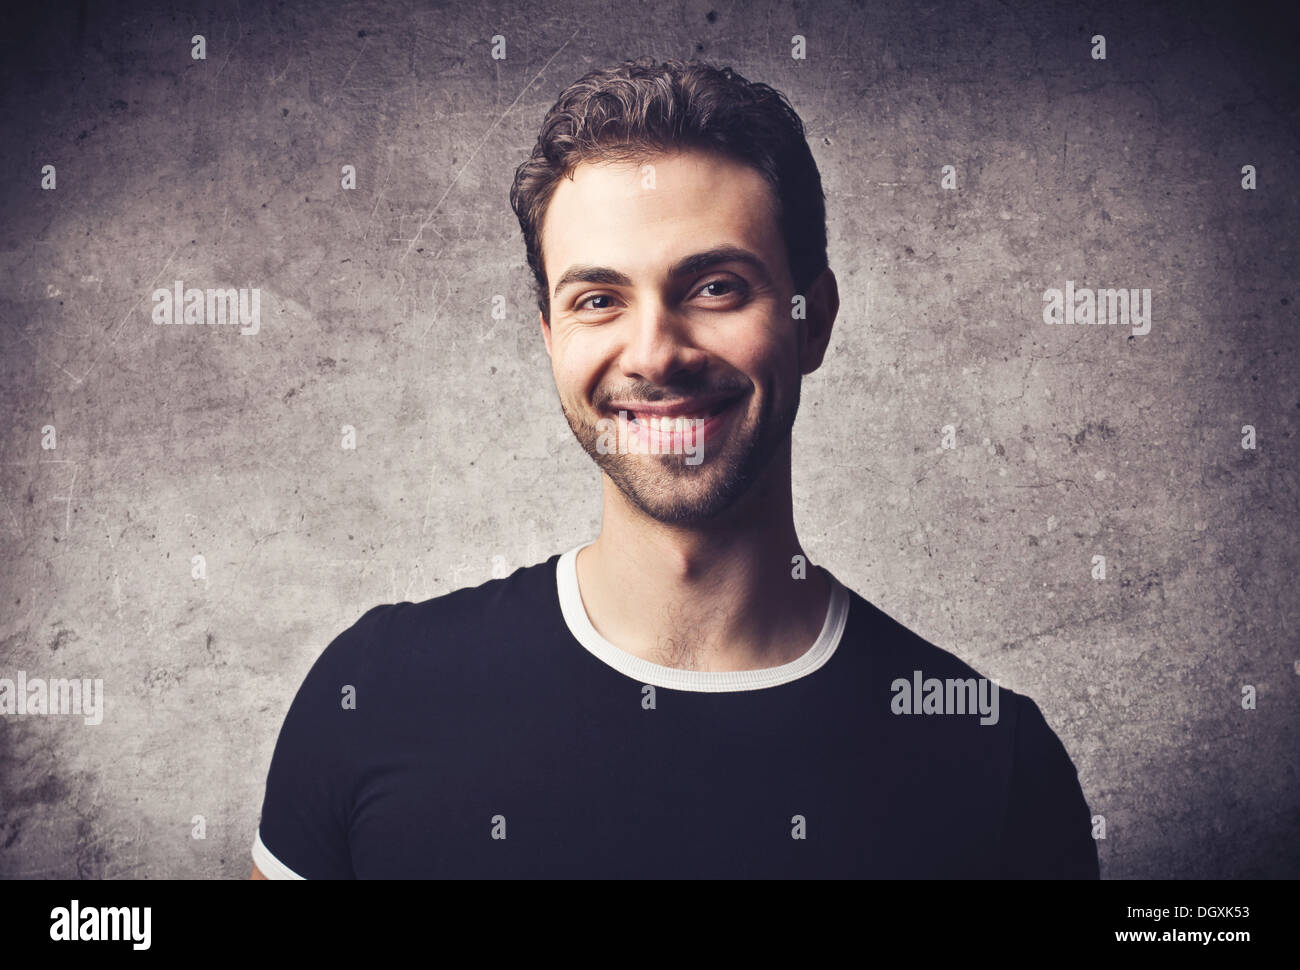 Portrait of a smiling boy in black t-shirt Stock Photo